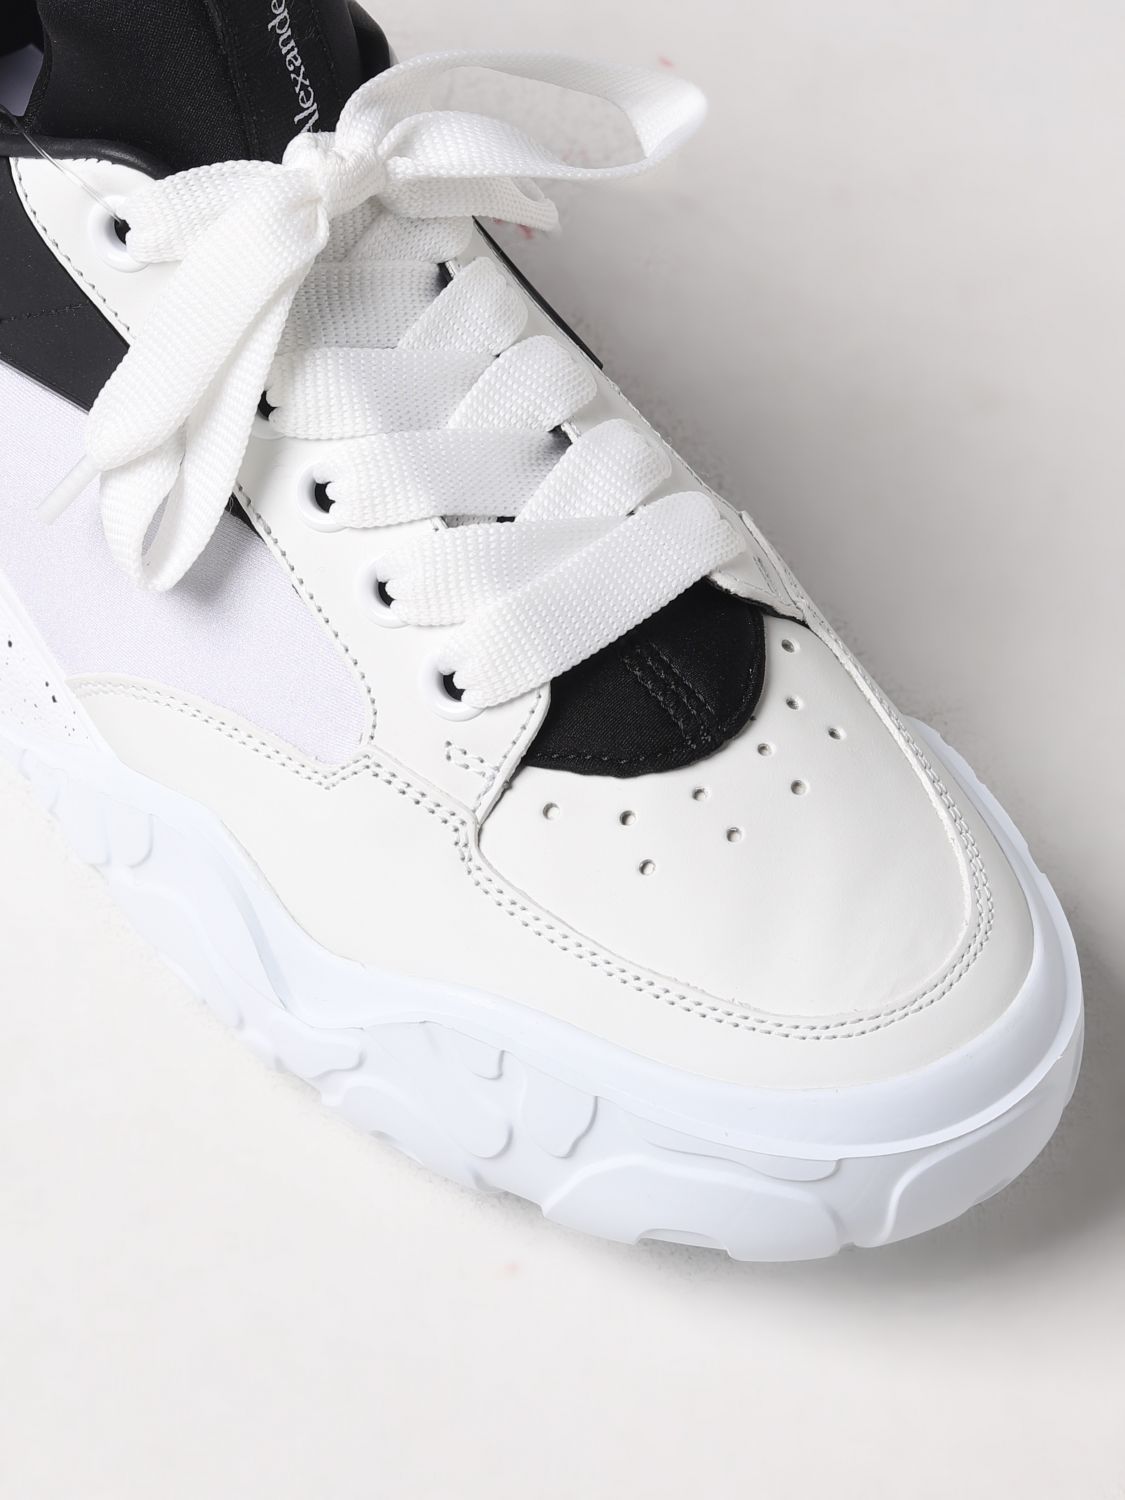 Alexander Mcqueen Outlet: New Court leather sneakers - White  Alexander Mcqueen  sneakers 634619WIA99 online at